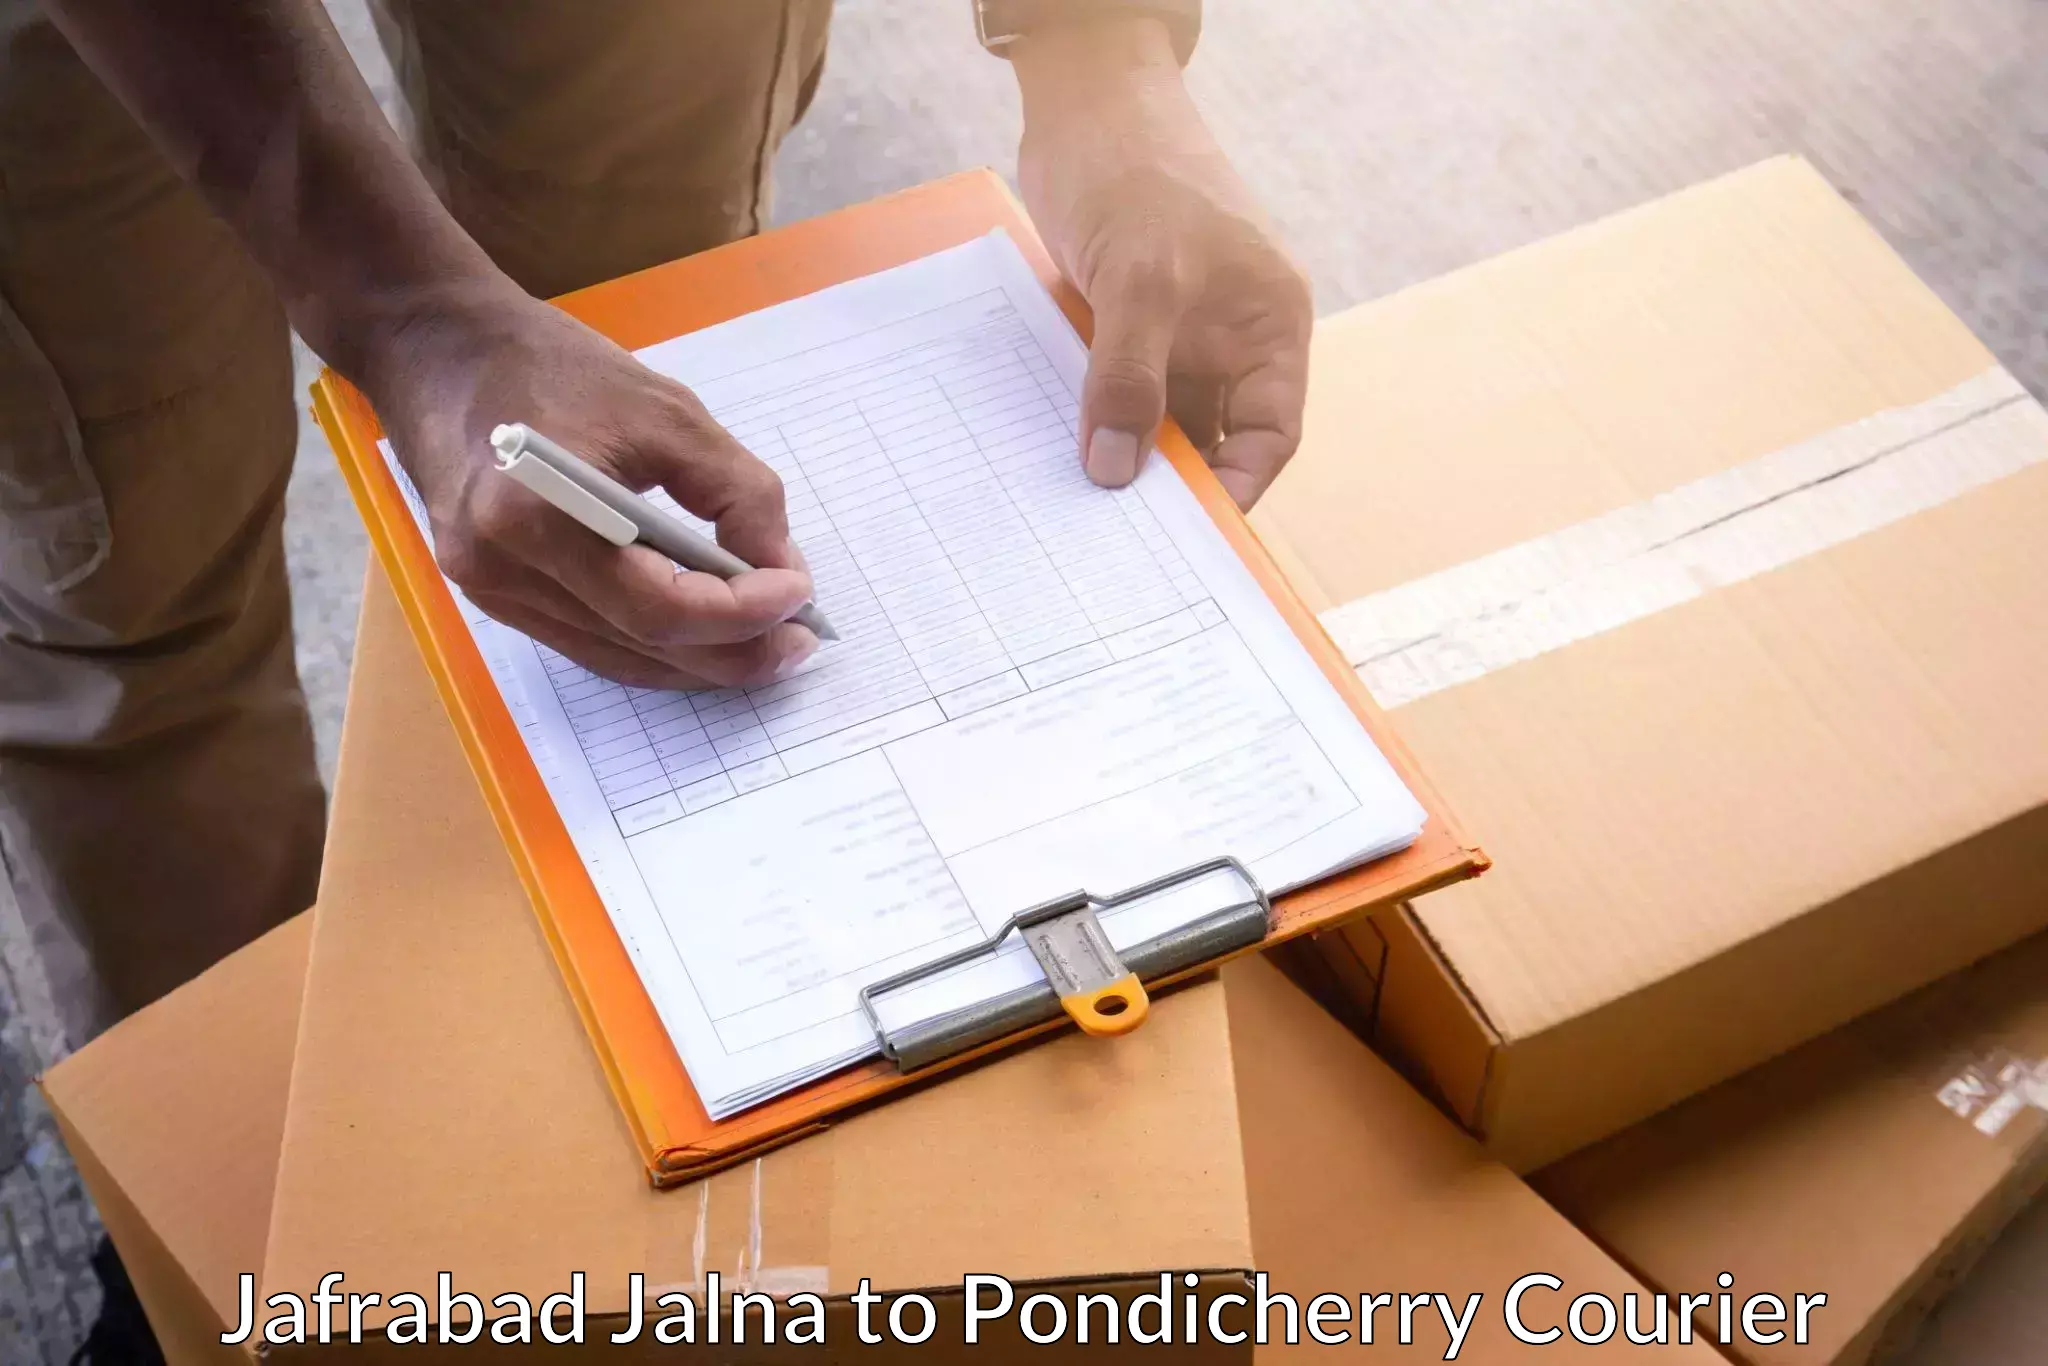 Overnight delivery services Jafrabad Jalna to Pondicherry